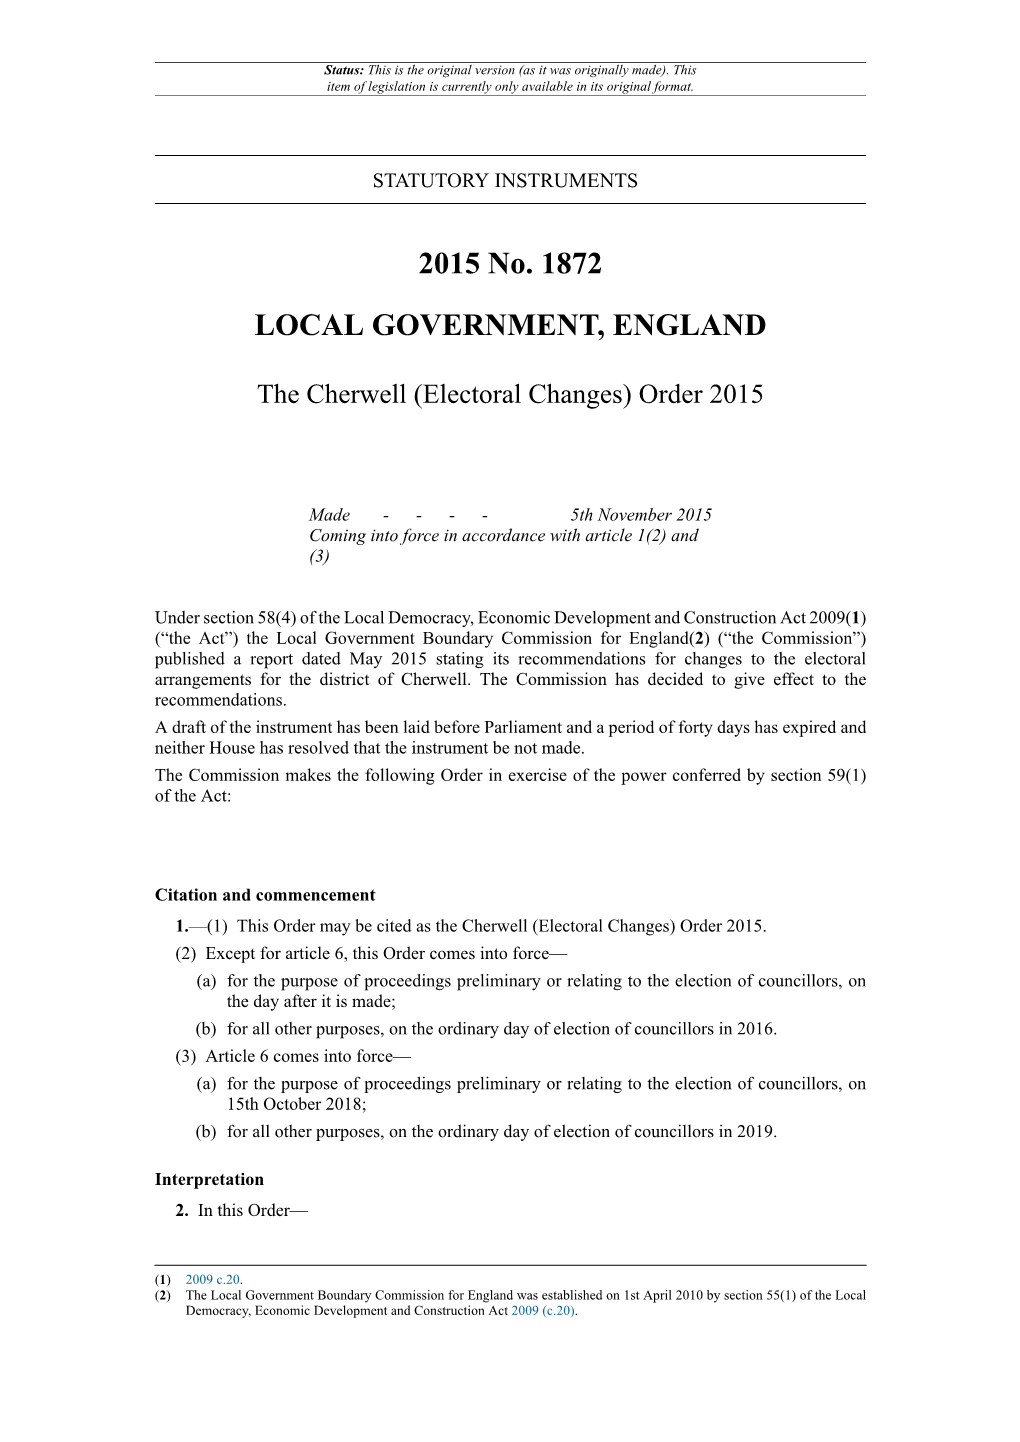 The Cherwell (Electoral Changes) Order 2015